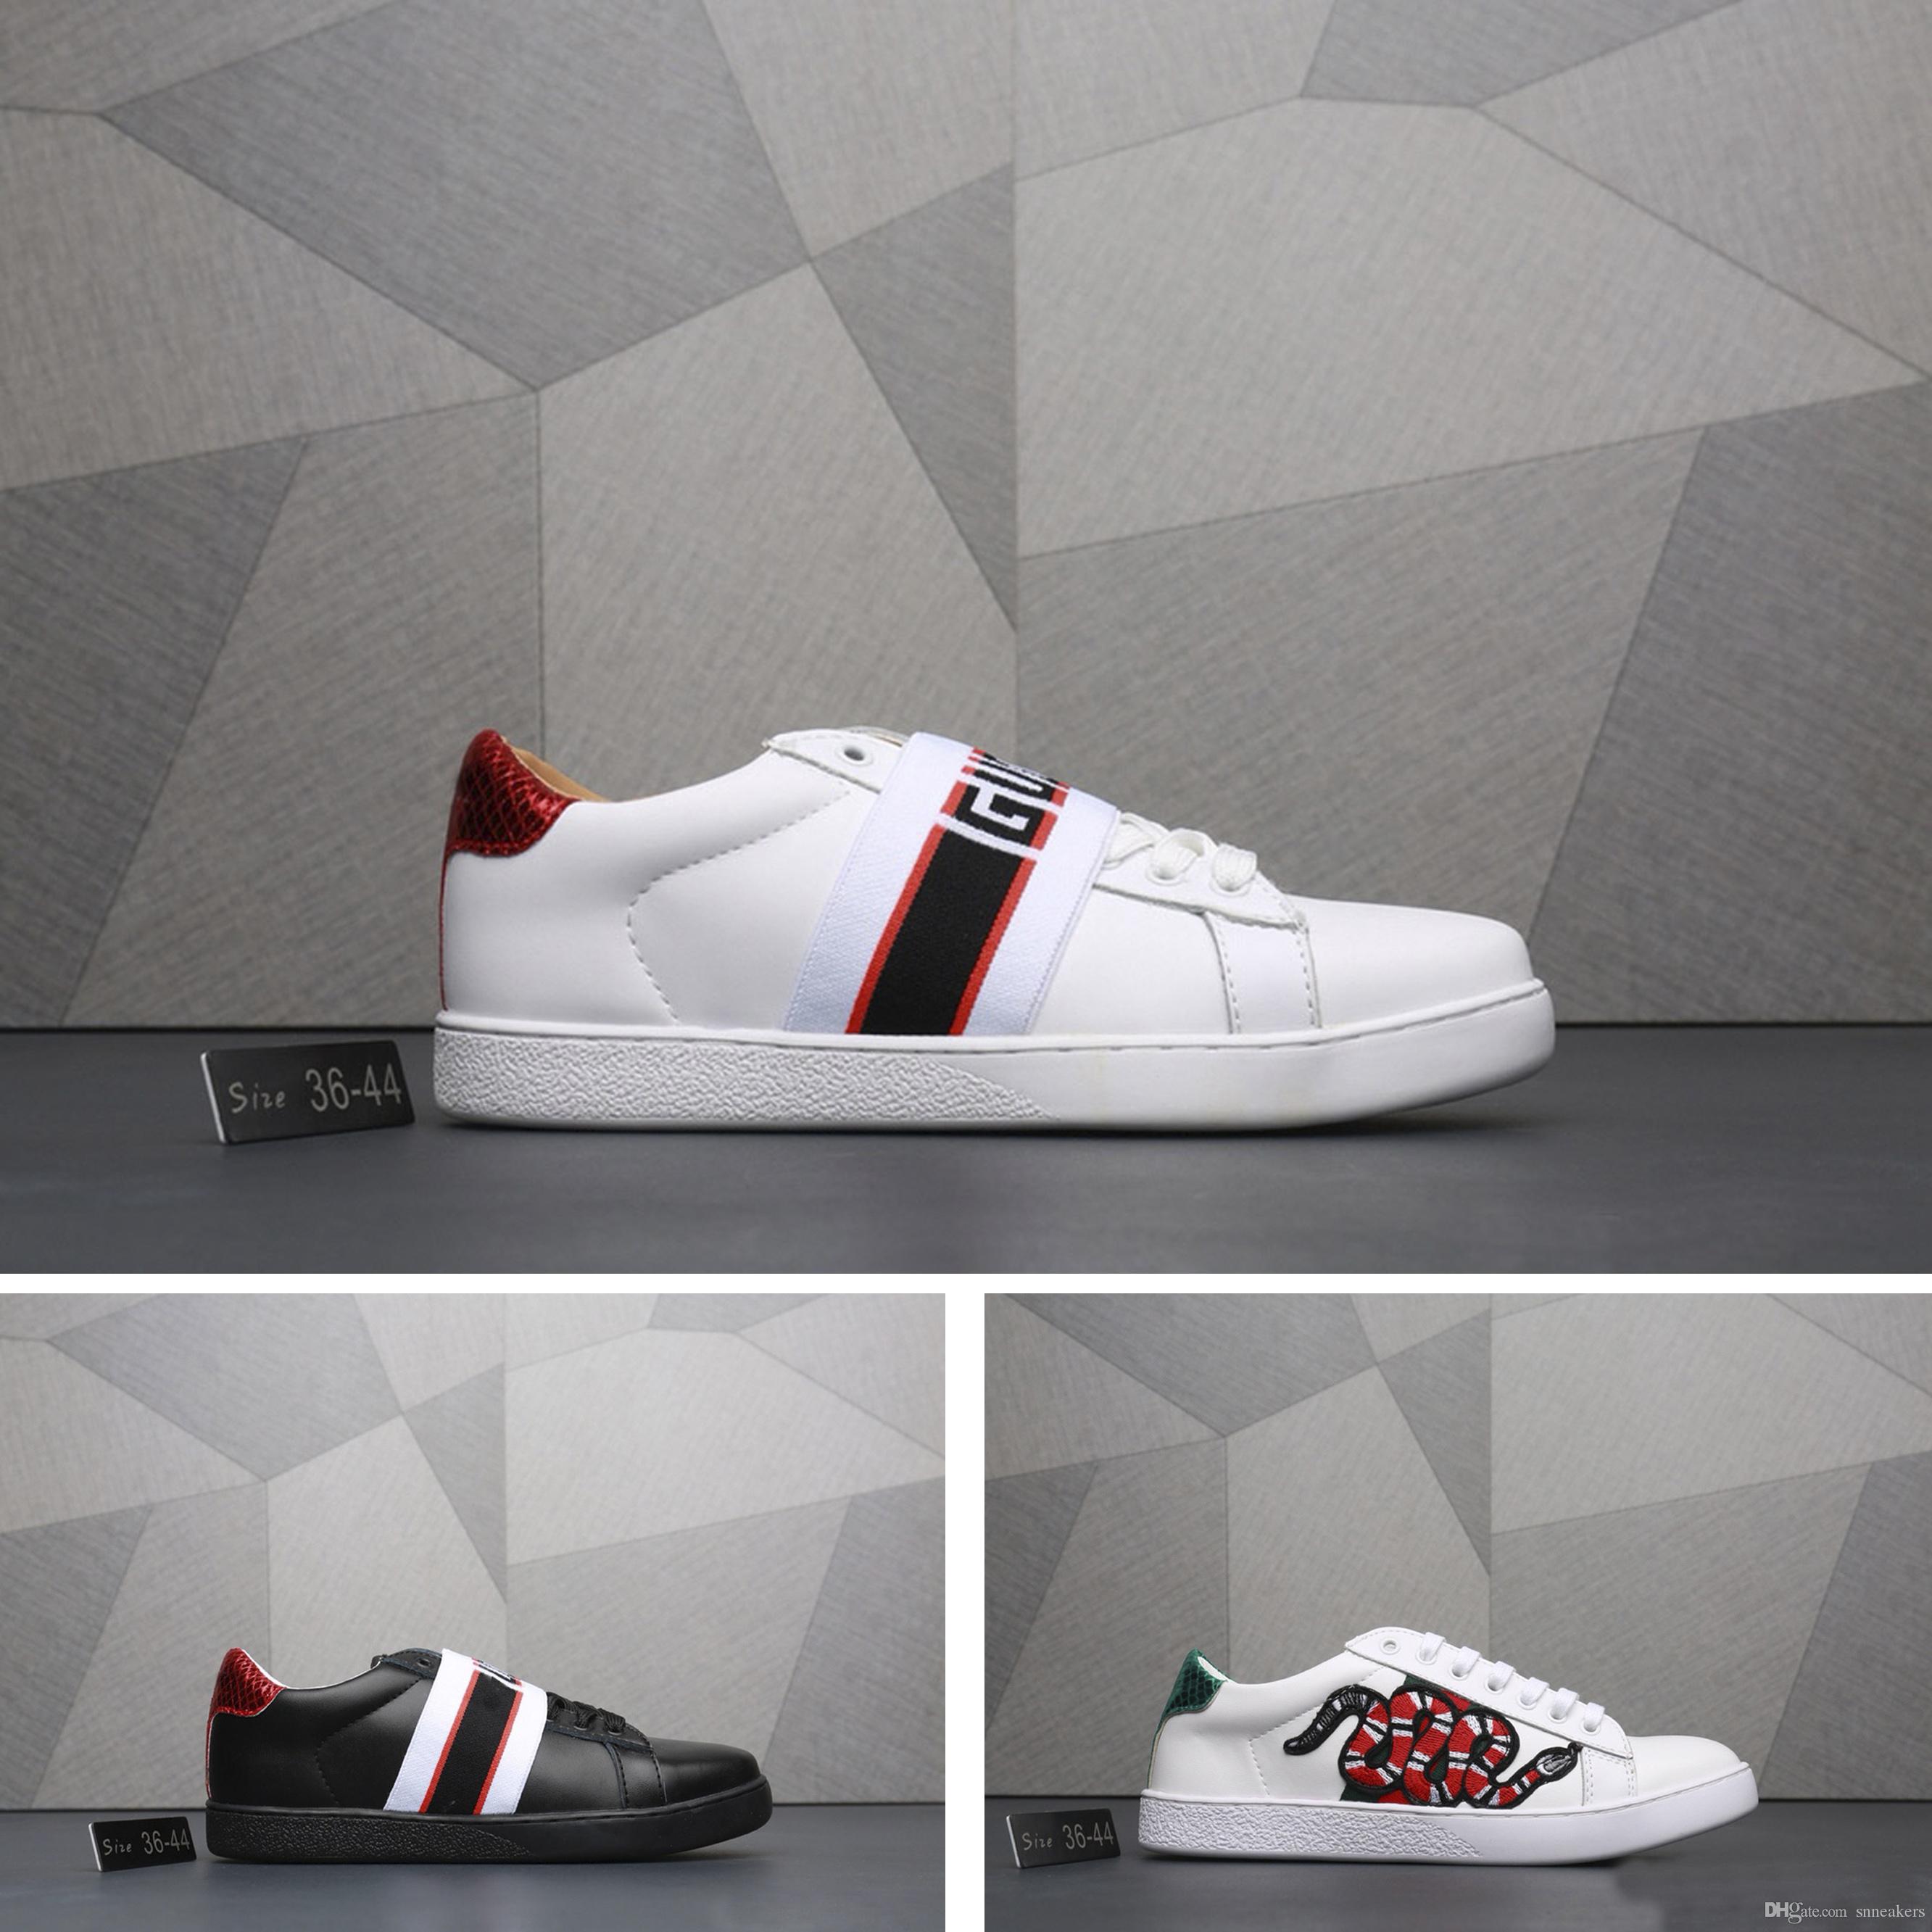 gucci homme chaussures